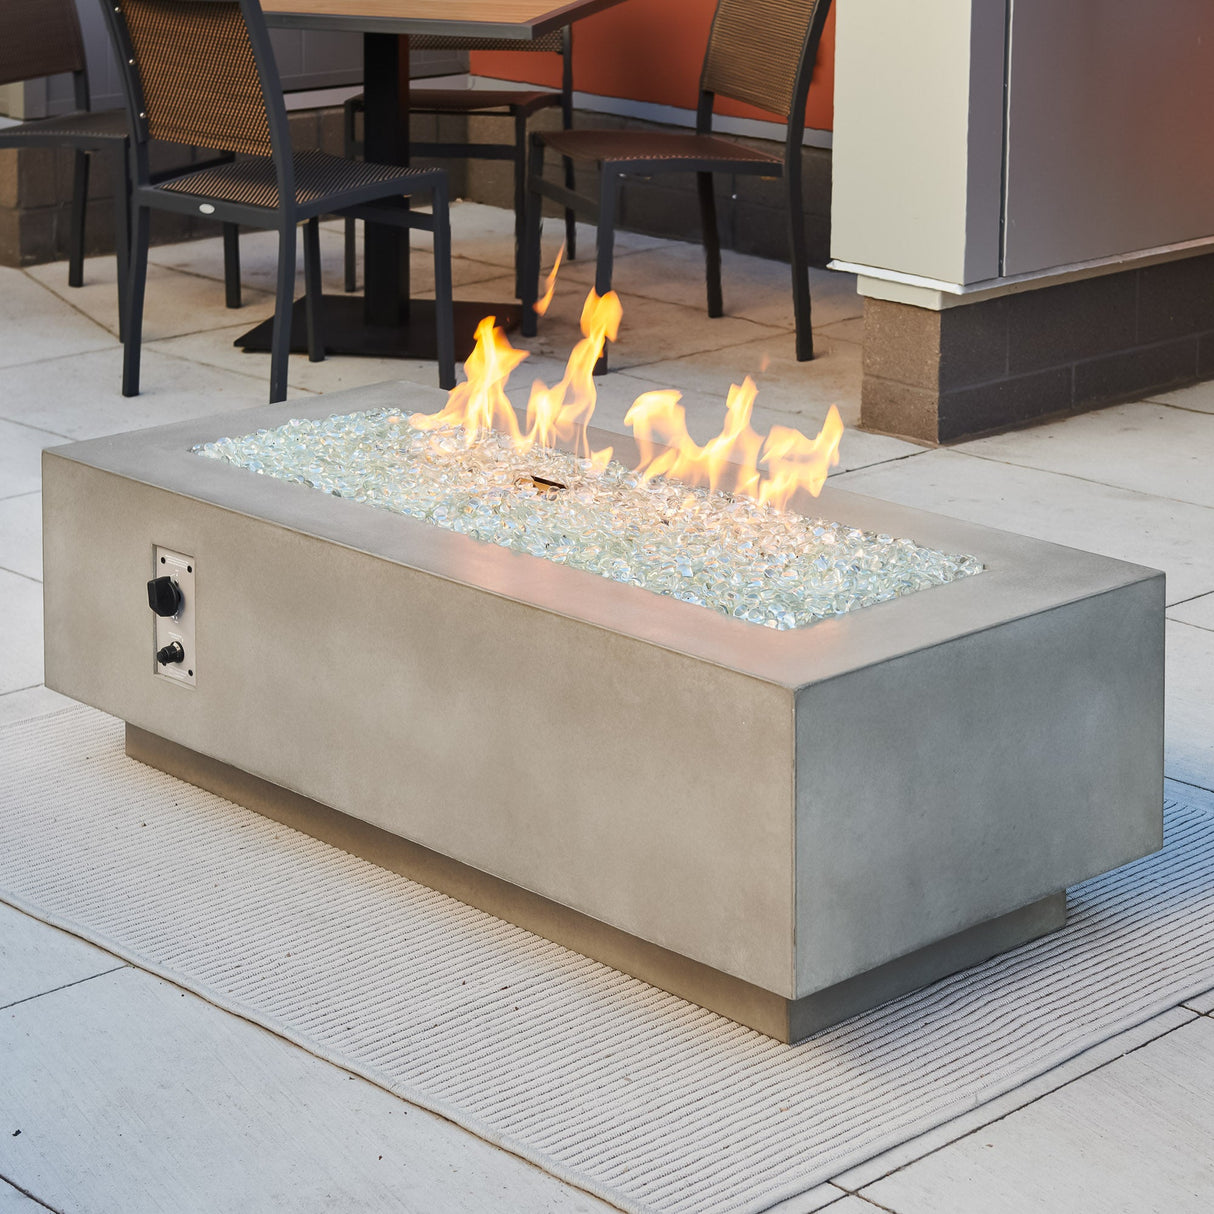 A Natural Grey Cove Linear Gas Fire Pit Table 54" with a large flame coming from the burner